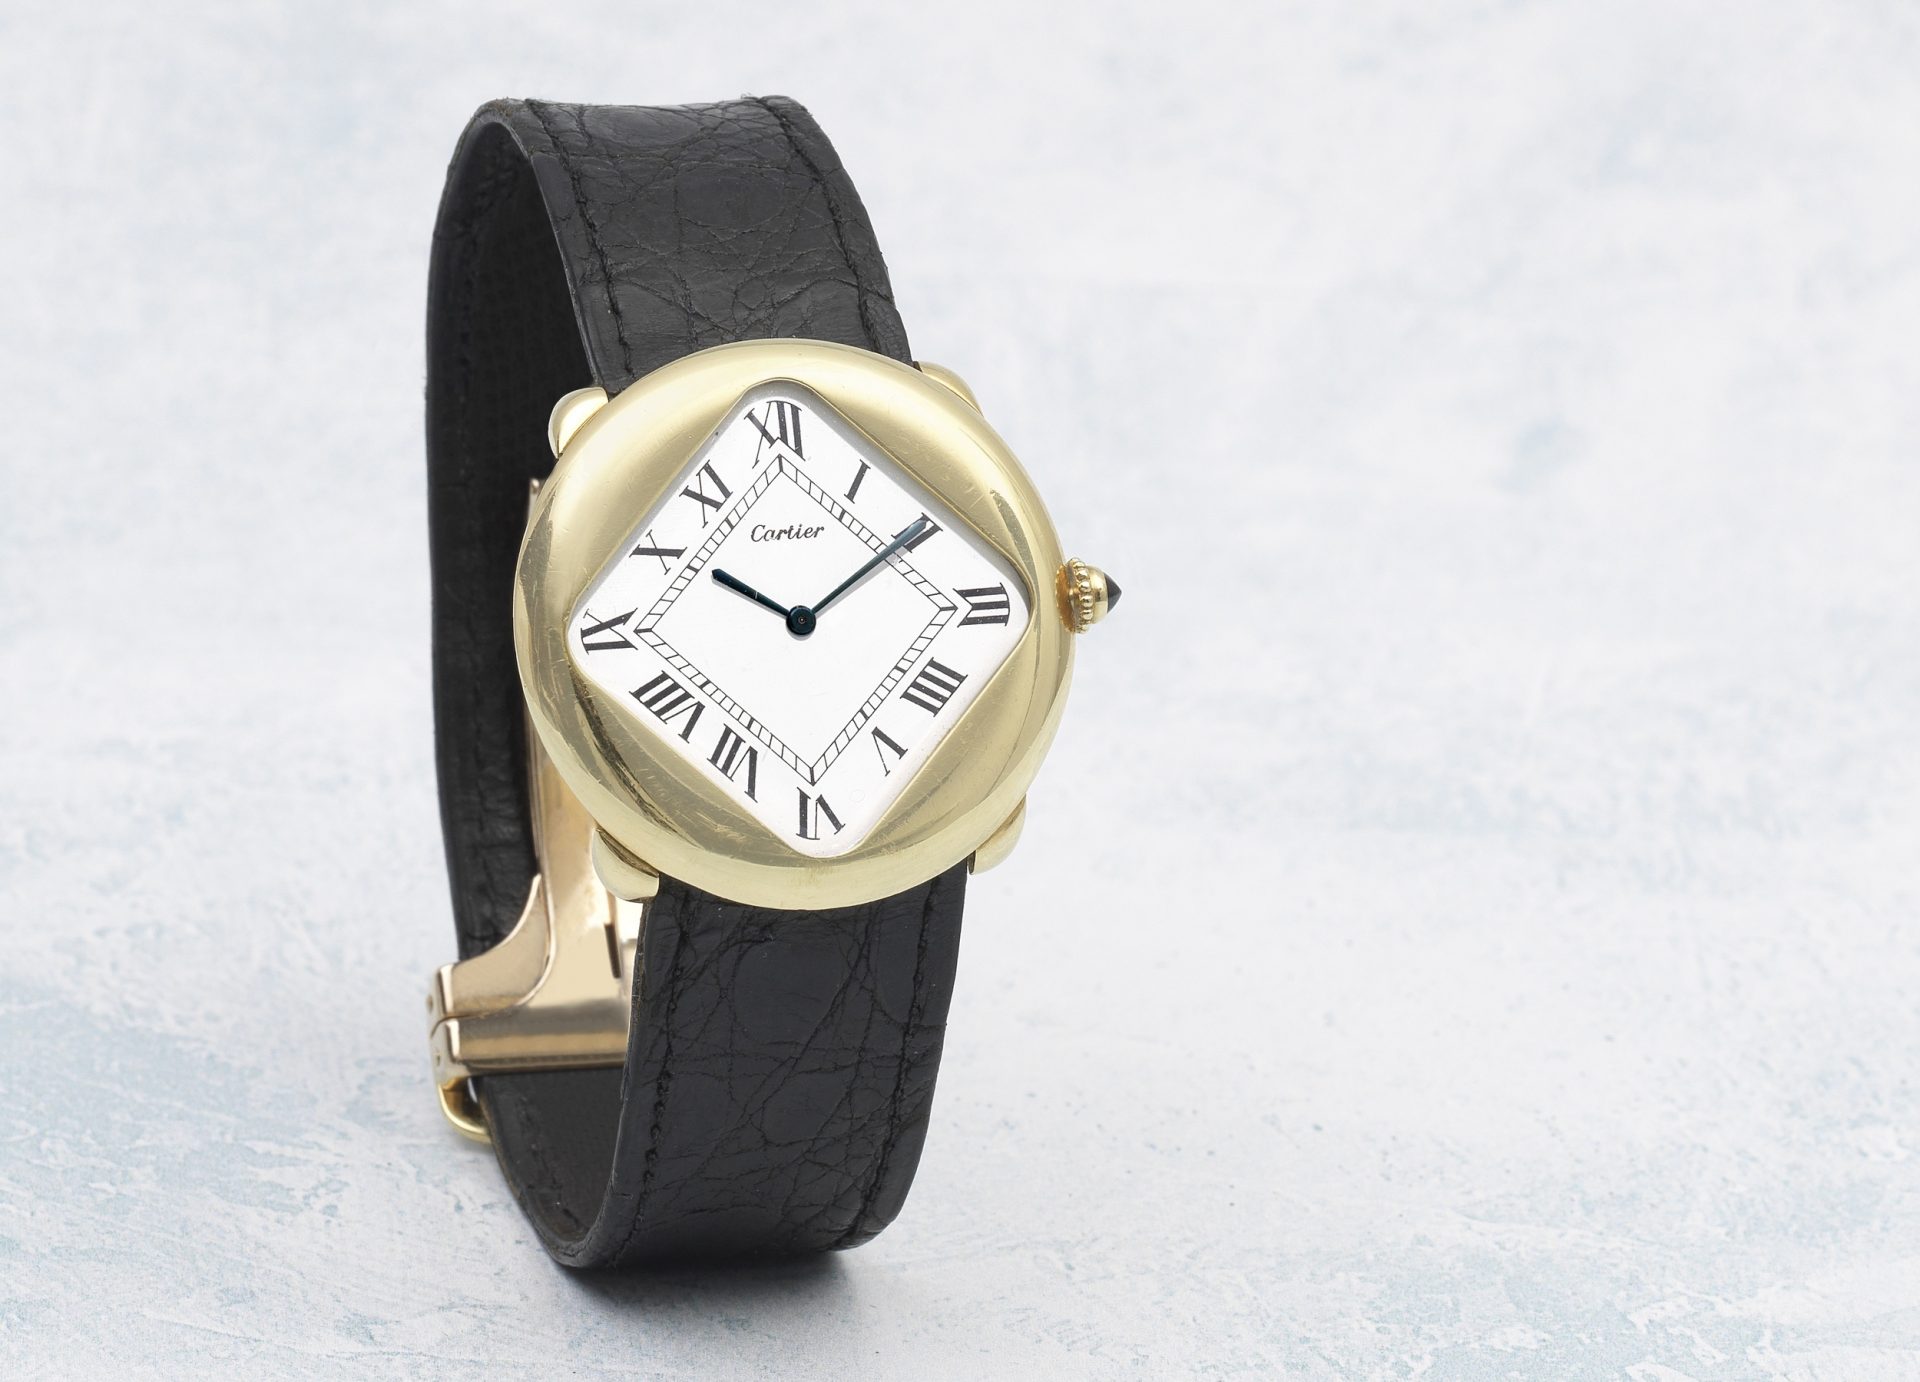 A cartier pebble turtle manual wind wristwatch sold by bonhams in june 2021 for 180000 the highest price for a cartier watch listed on the saleroom since 2014